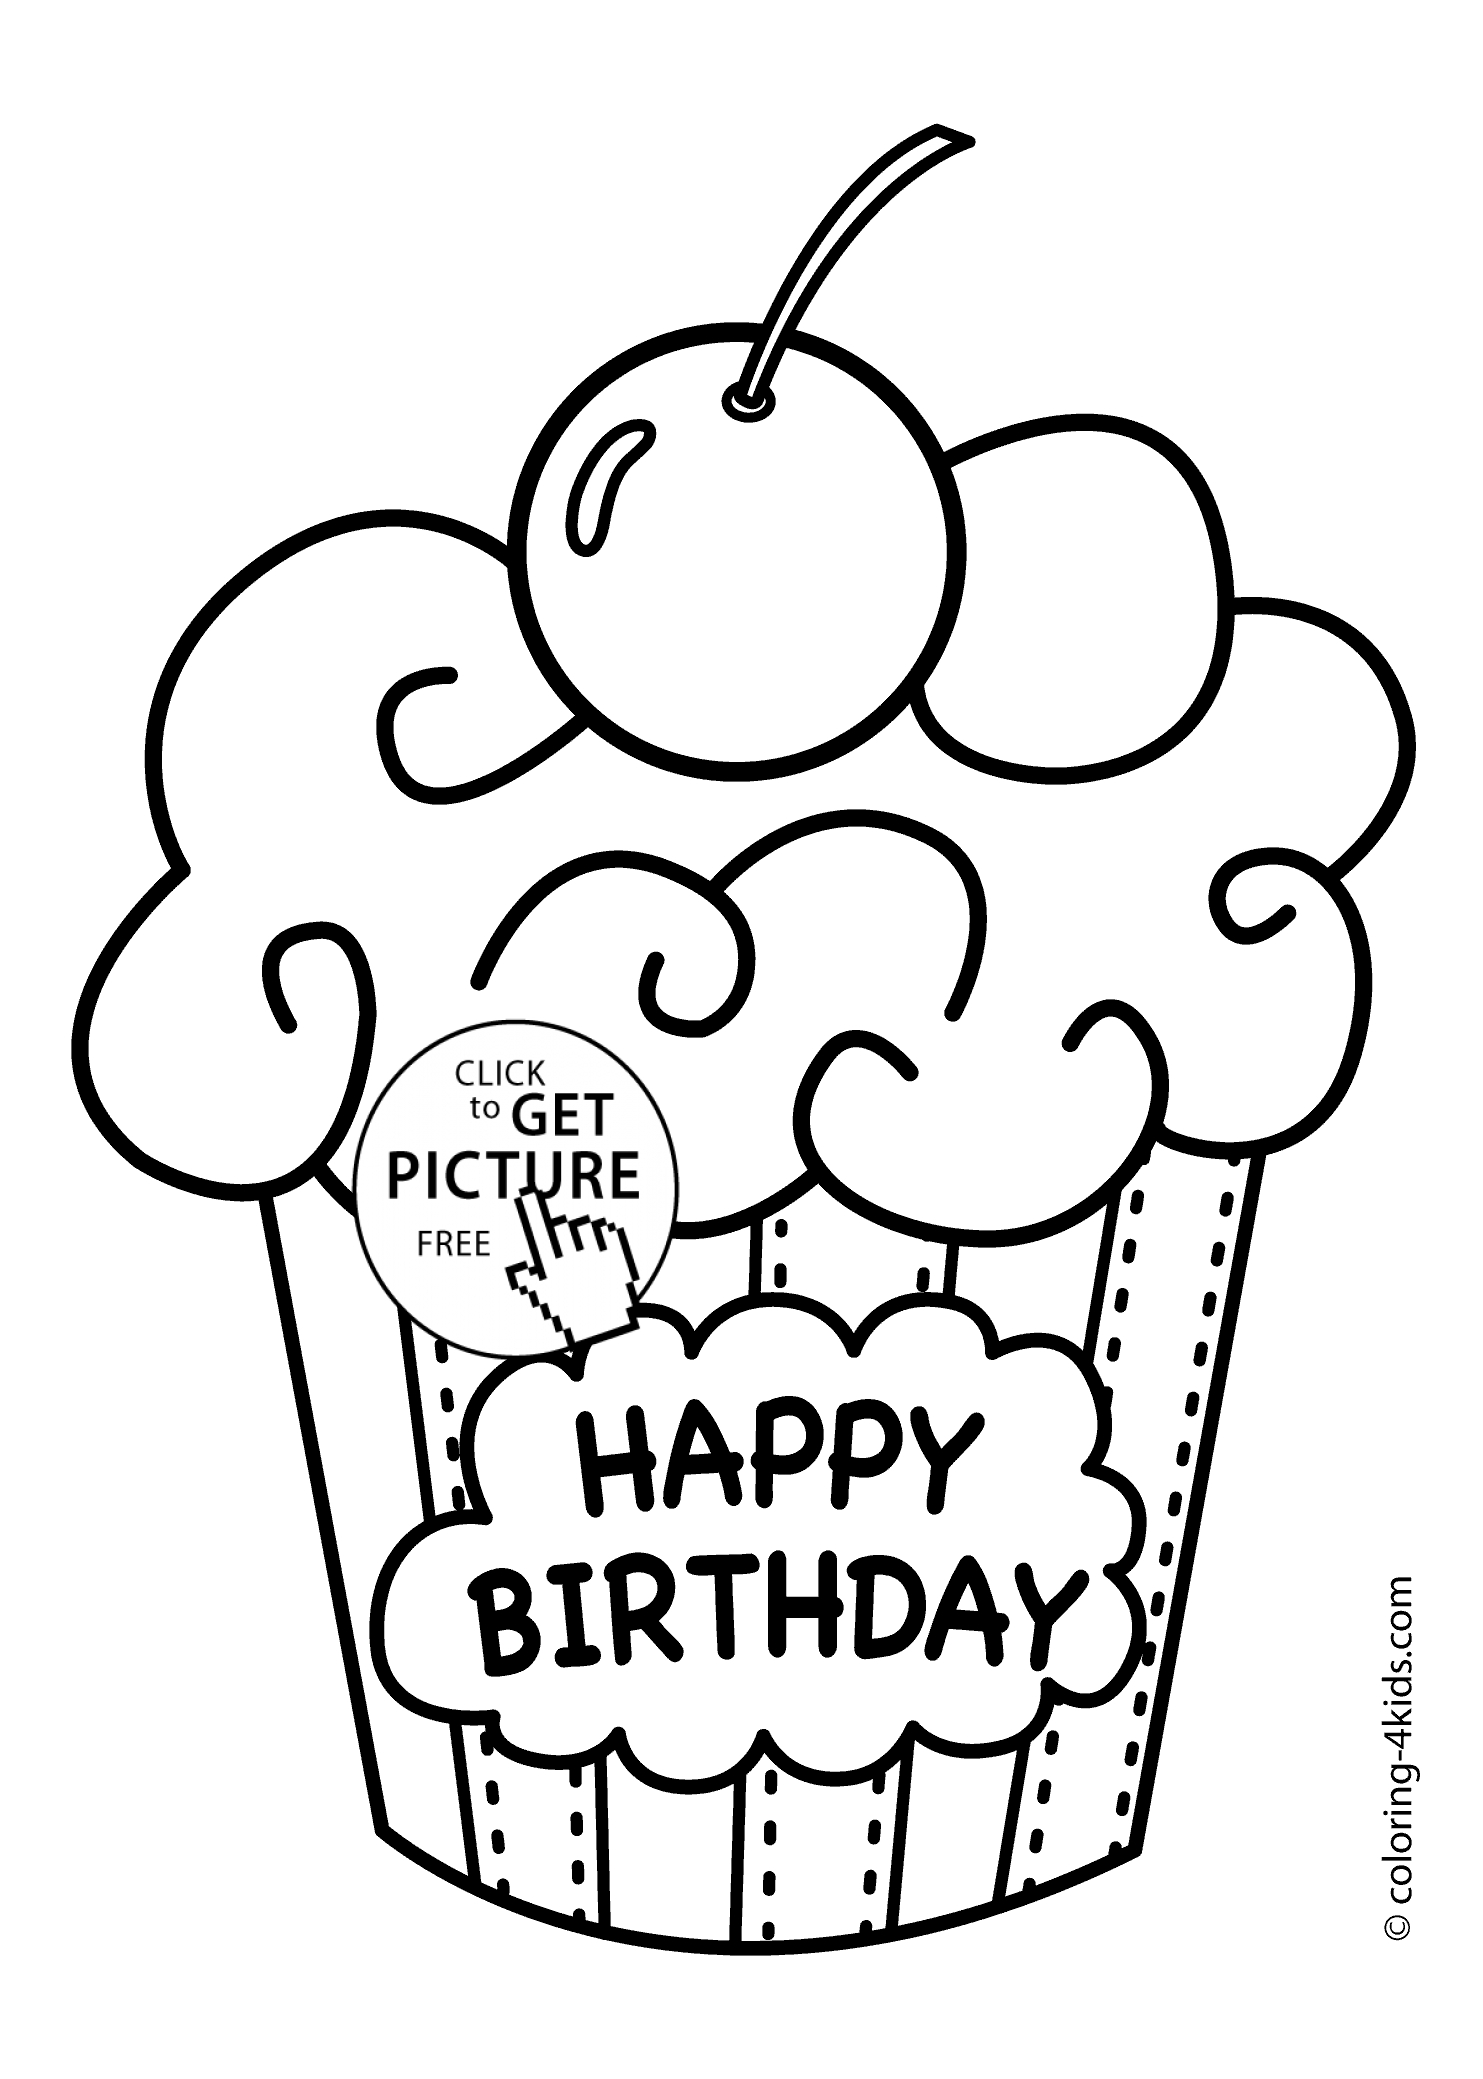 Happy Birthday Coloring Pages For Friends Happy Birthday Cake Coloring Pages Coloring Pages Patinsudouest